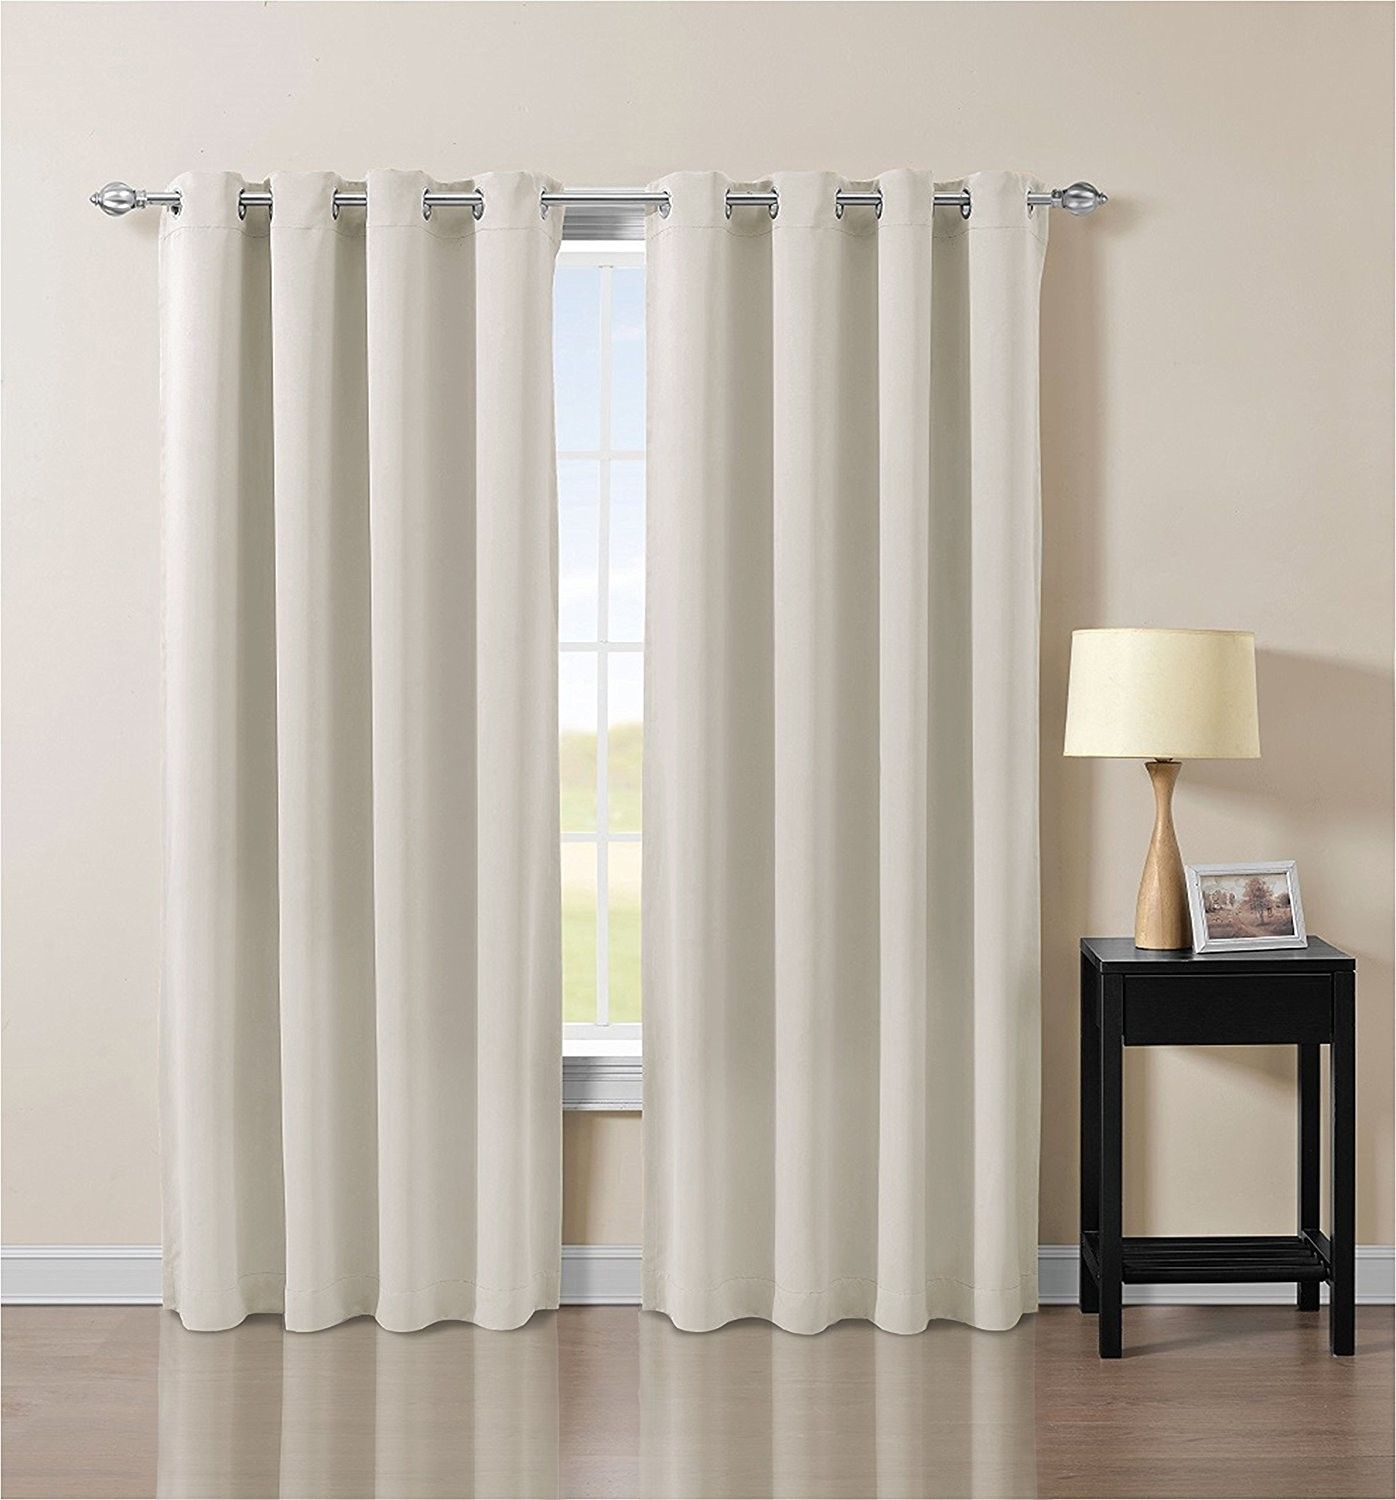 Solid Grommet Top Thermal Insulated Blackout Window Curtain With Thermal Insulated Blackout Grommet Top Curtain Panel Pairs (View 26 of 30)